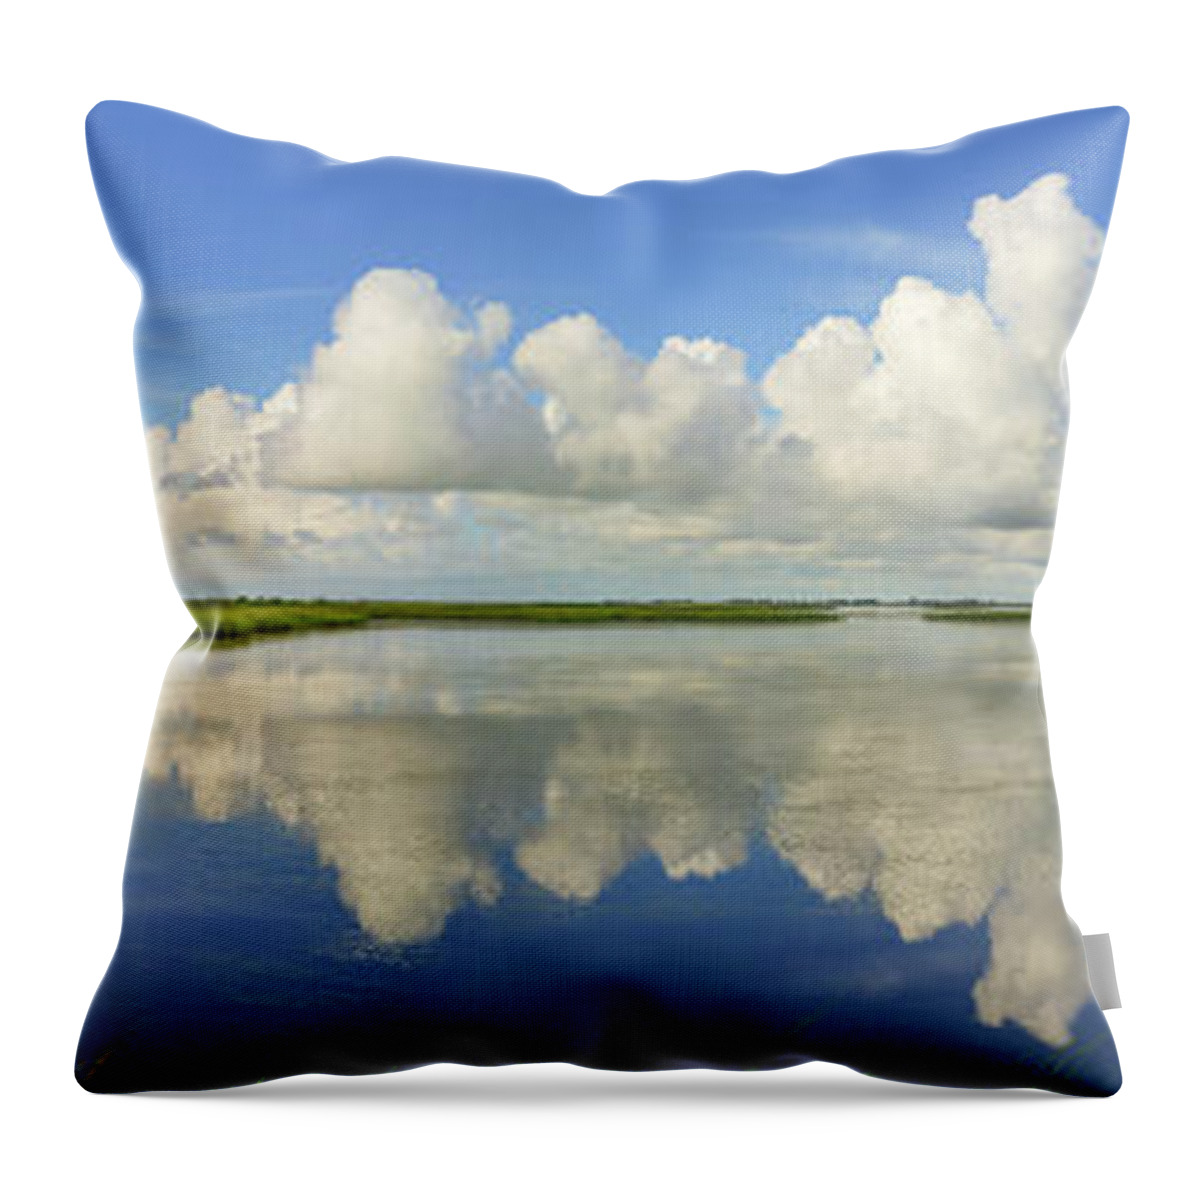  Throw Pillow featuring the photograph Port Bay Pano #1 by Christopher Rice